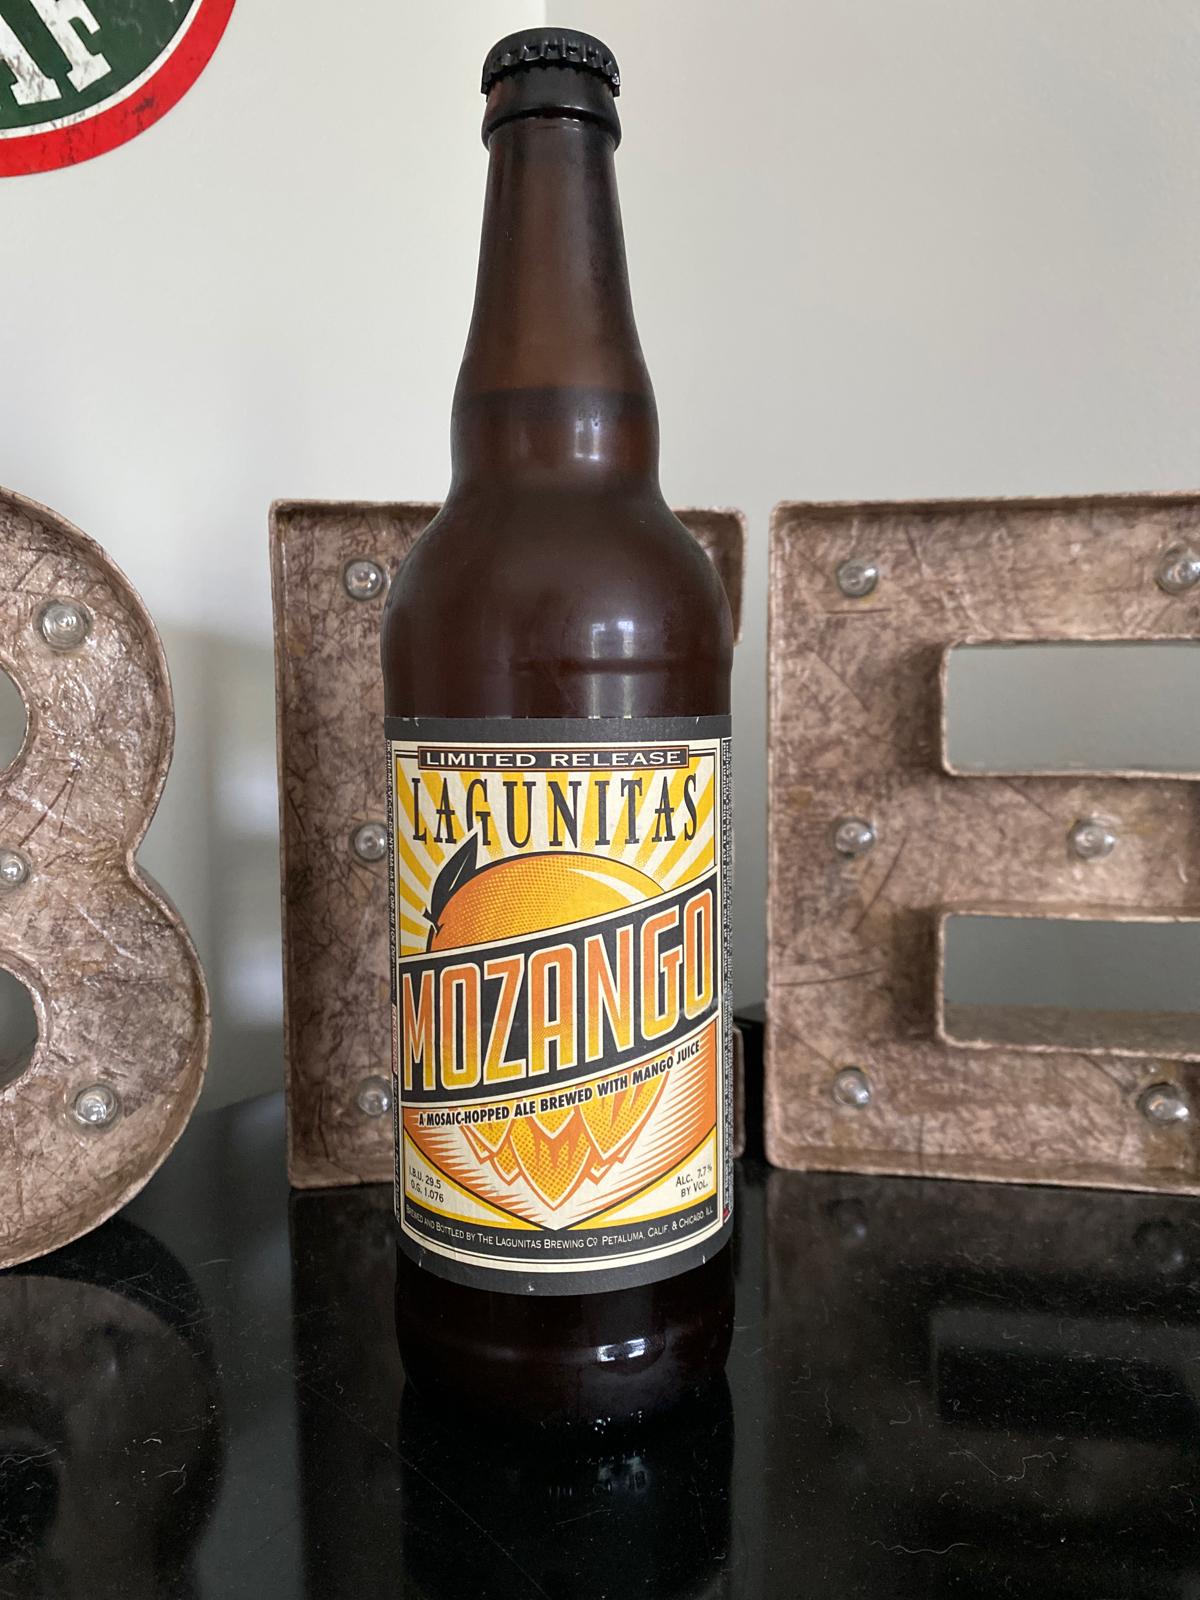 Mozango: Limited Release